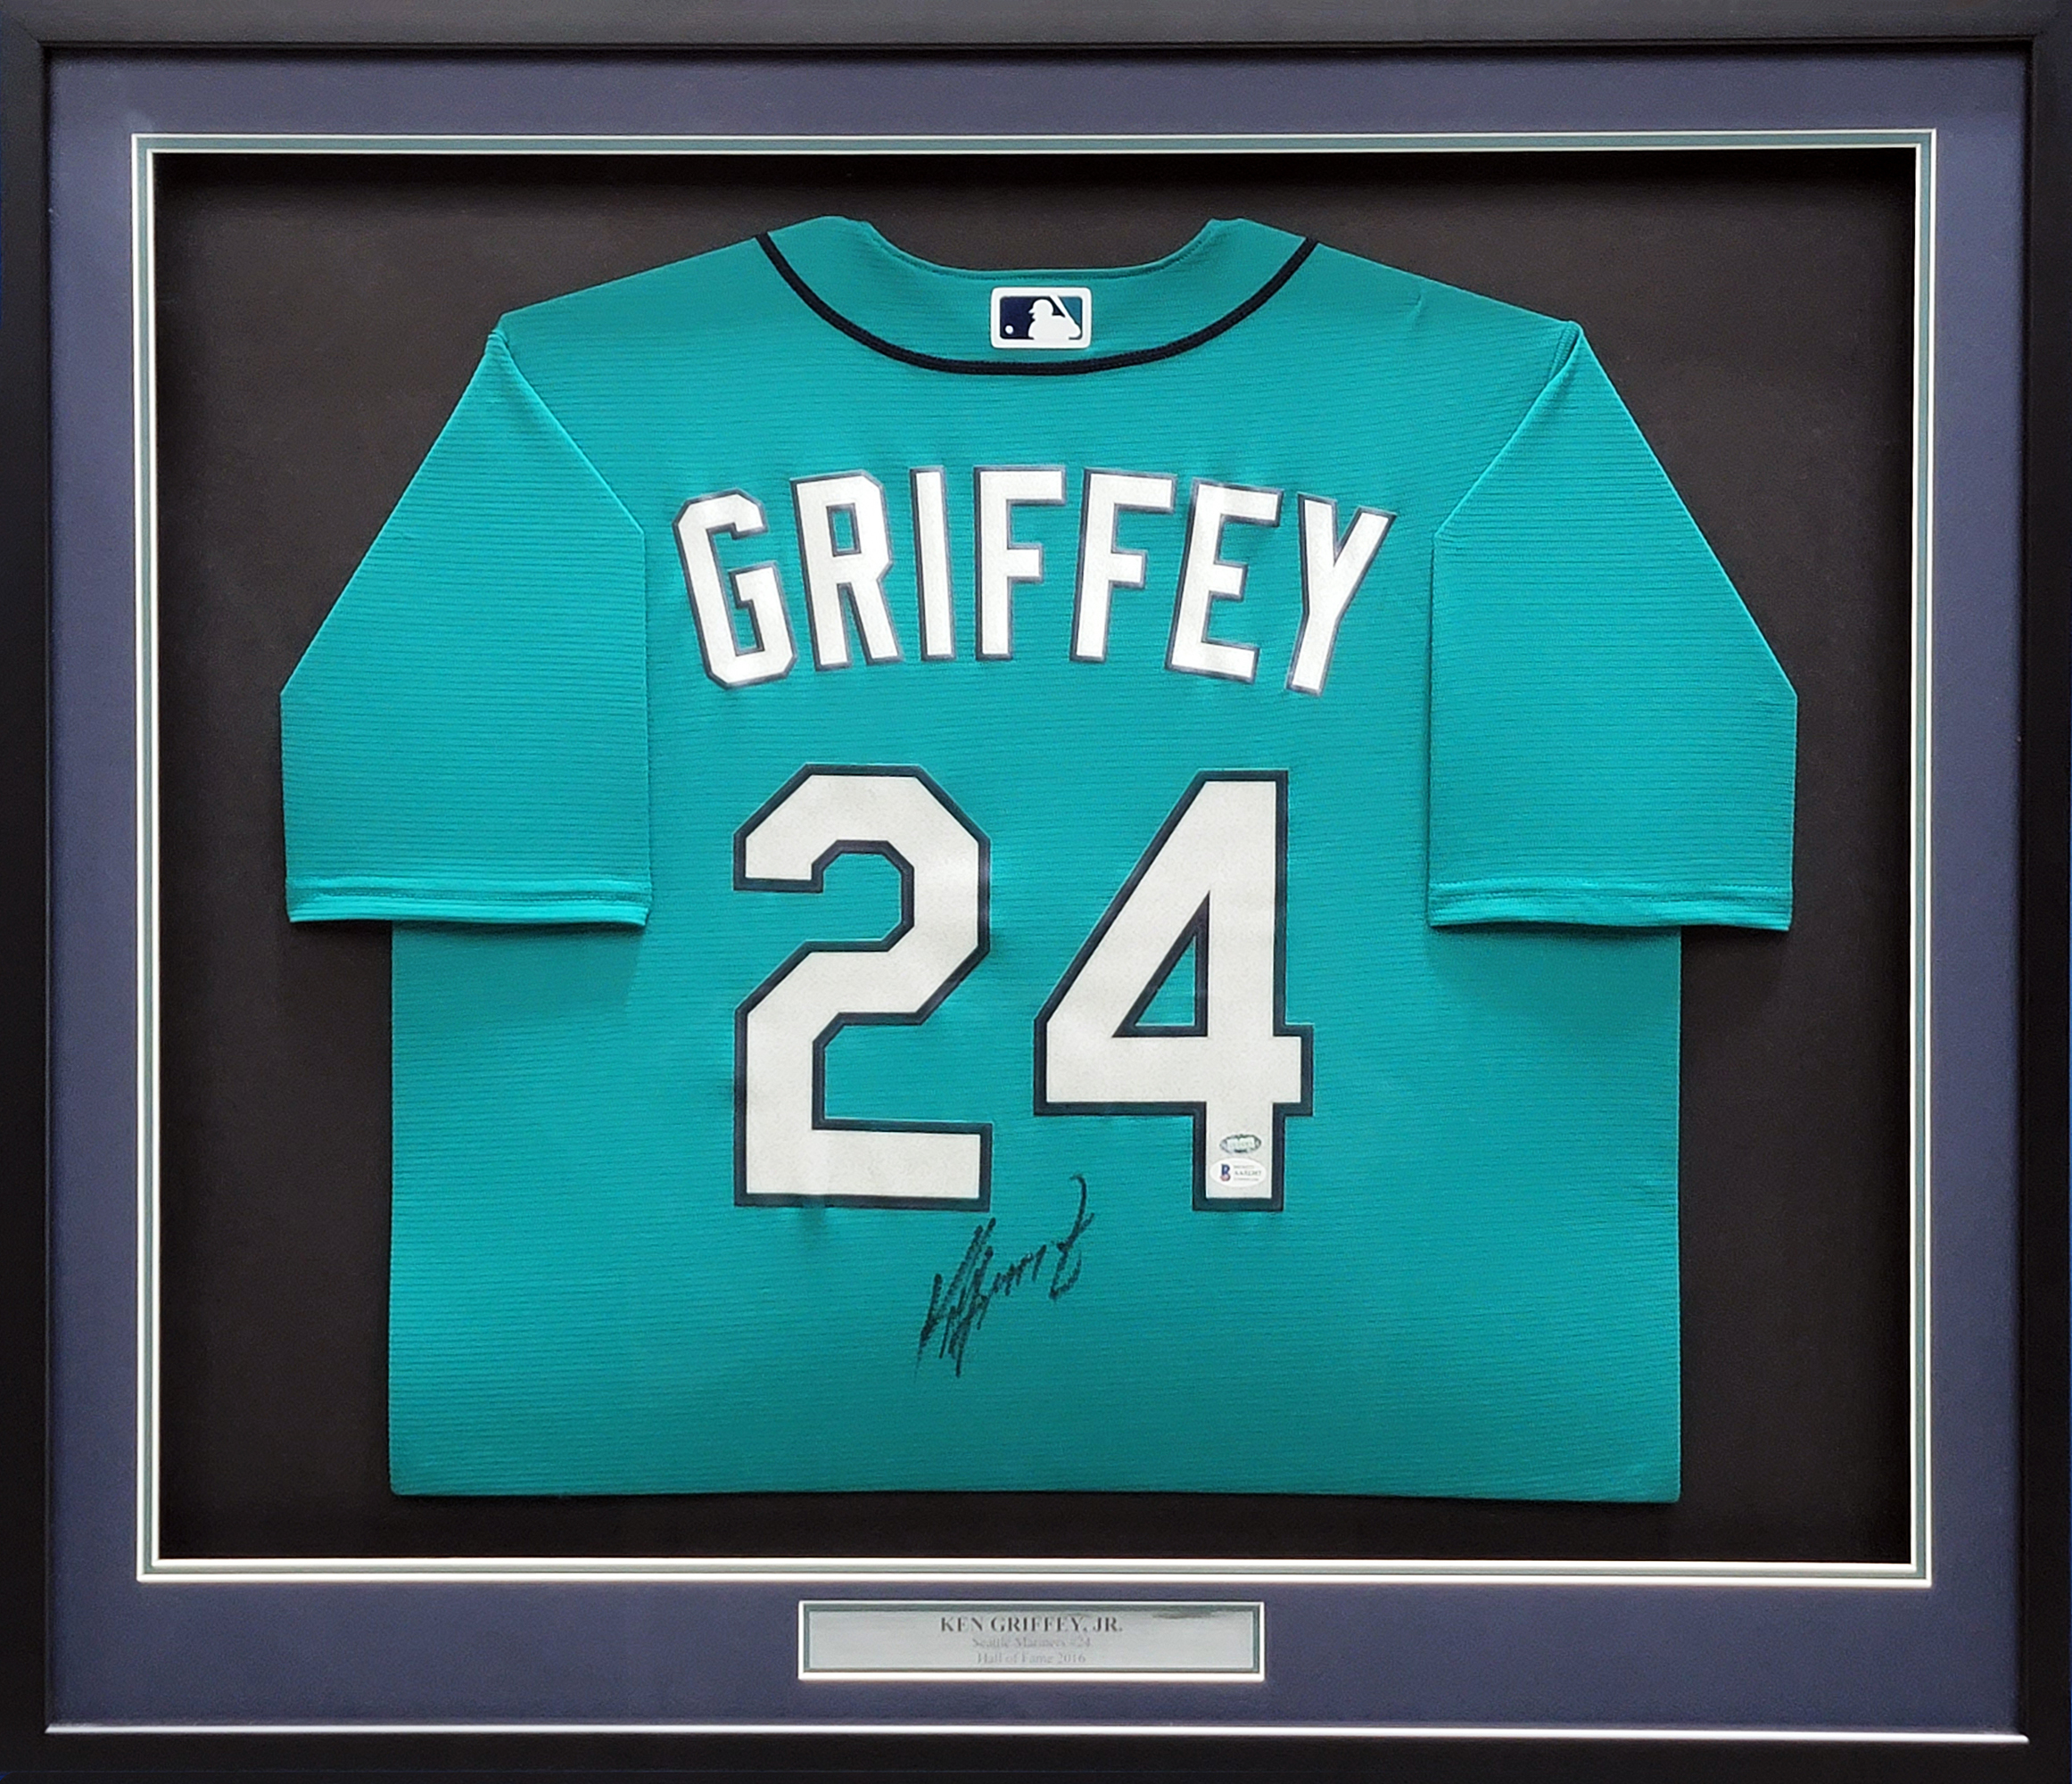 Seattle Mariners Ken Griffey Jr. Autographed Teal Authentic Mitchell & Ness  1995 Authentic Cooperstown Collection Jersey Size L Negro League Patch  Beckett BAS Witness Stock #212469